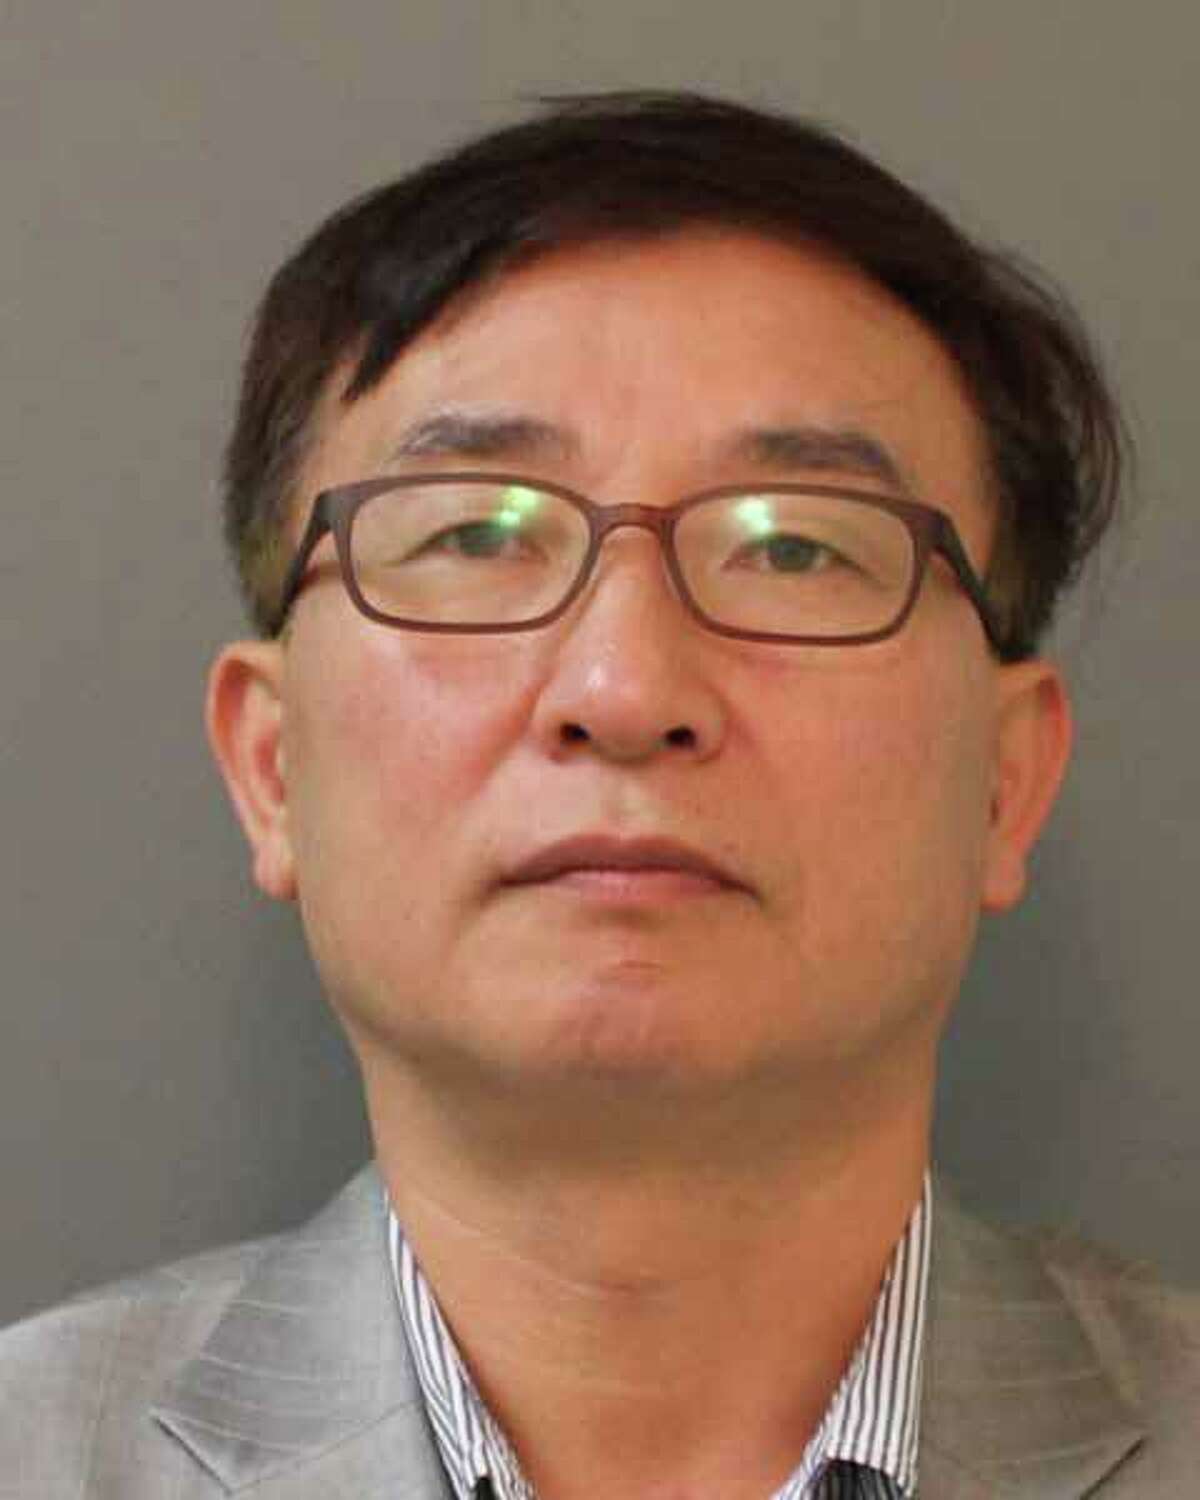 Allegations against Kim Hyung of Fresh Meadows, N.Y., have led to criminal charges against him and lawsuits against Cocco Spa in Shelton.